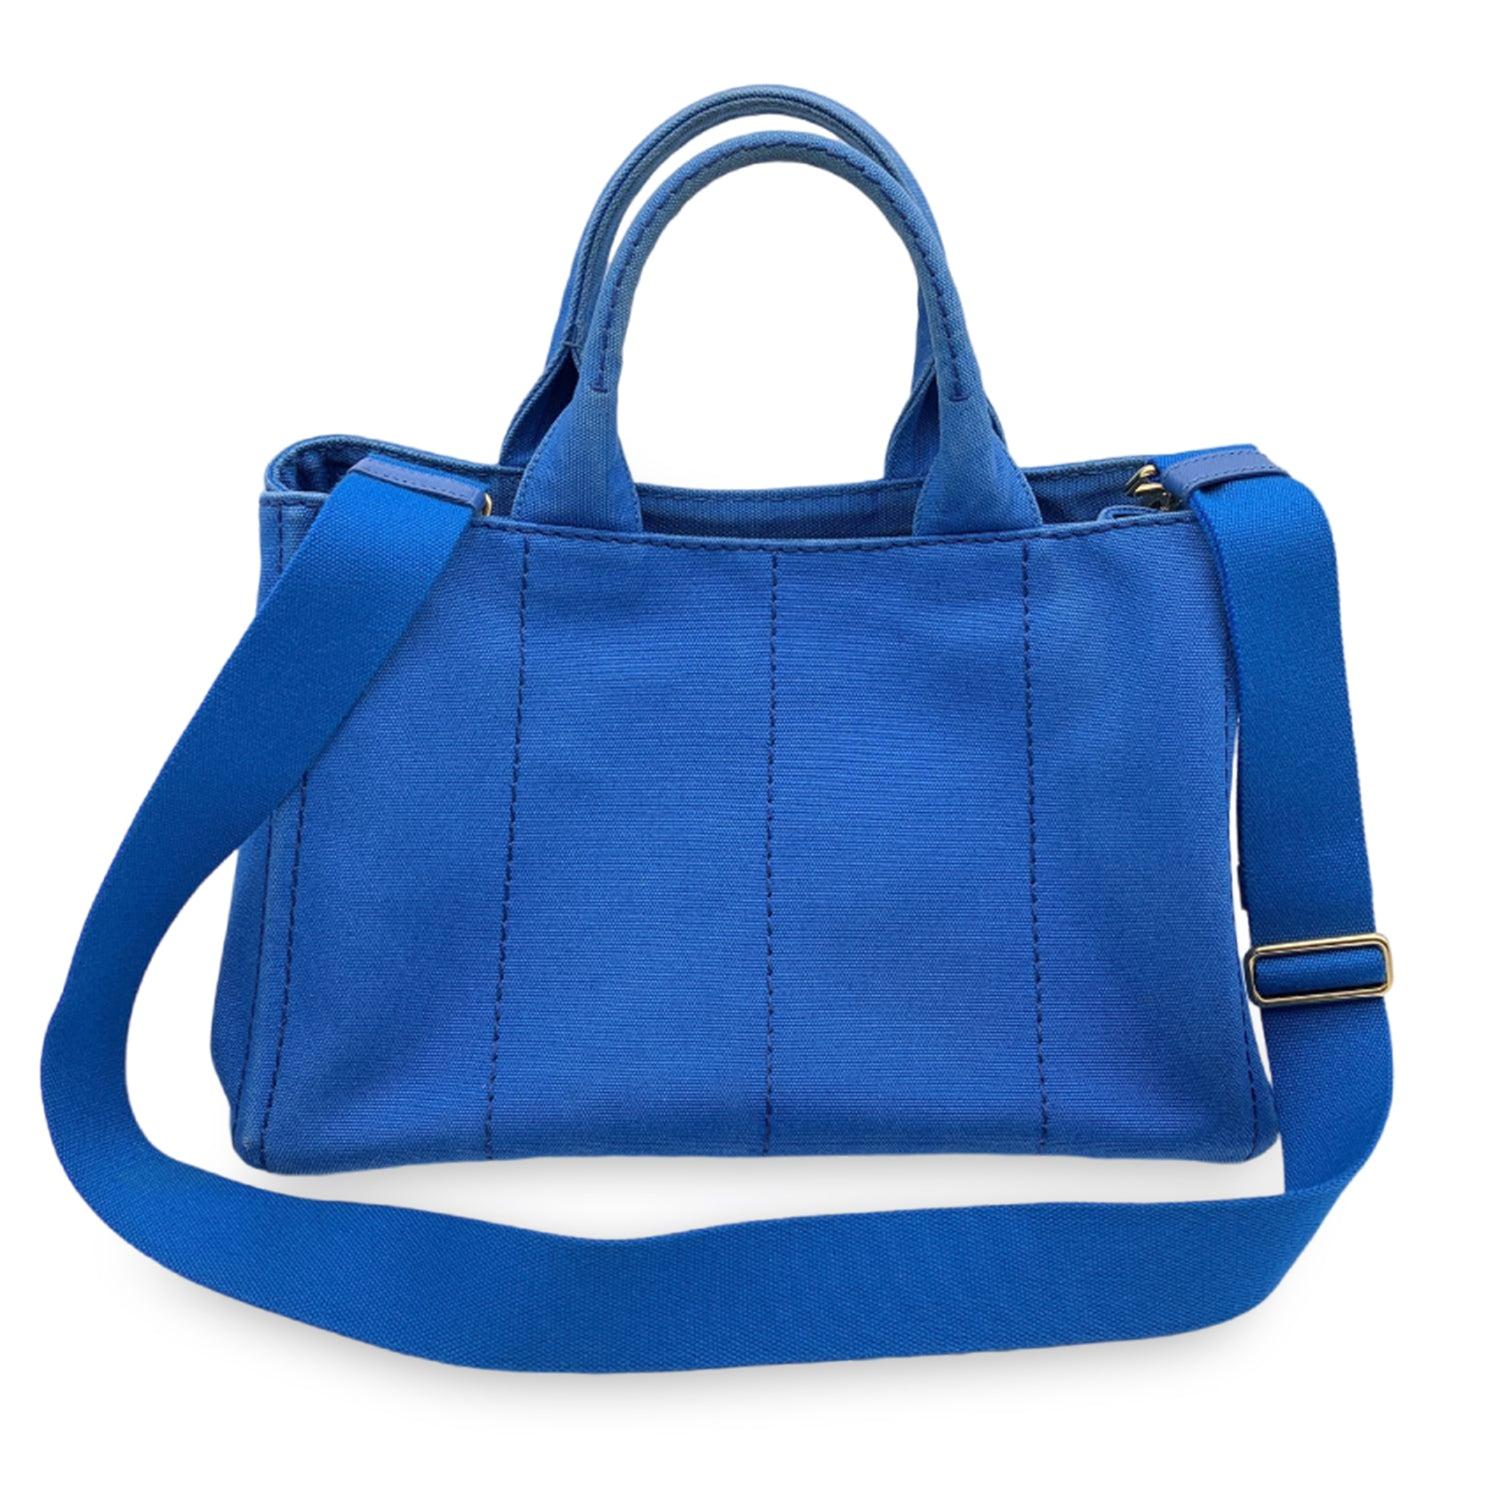 Prada large Canapa 2 way tote bag in blue hemp canvas with printed Prada logo and Prada triangle logo on the sides. Canvas handles. Removable canvas shoulder strap. Open top with side snap buttons. Canvas interior with 2 zip pockets and 3 open